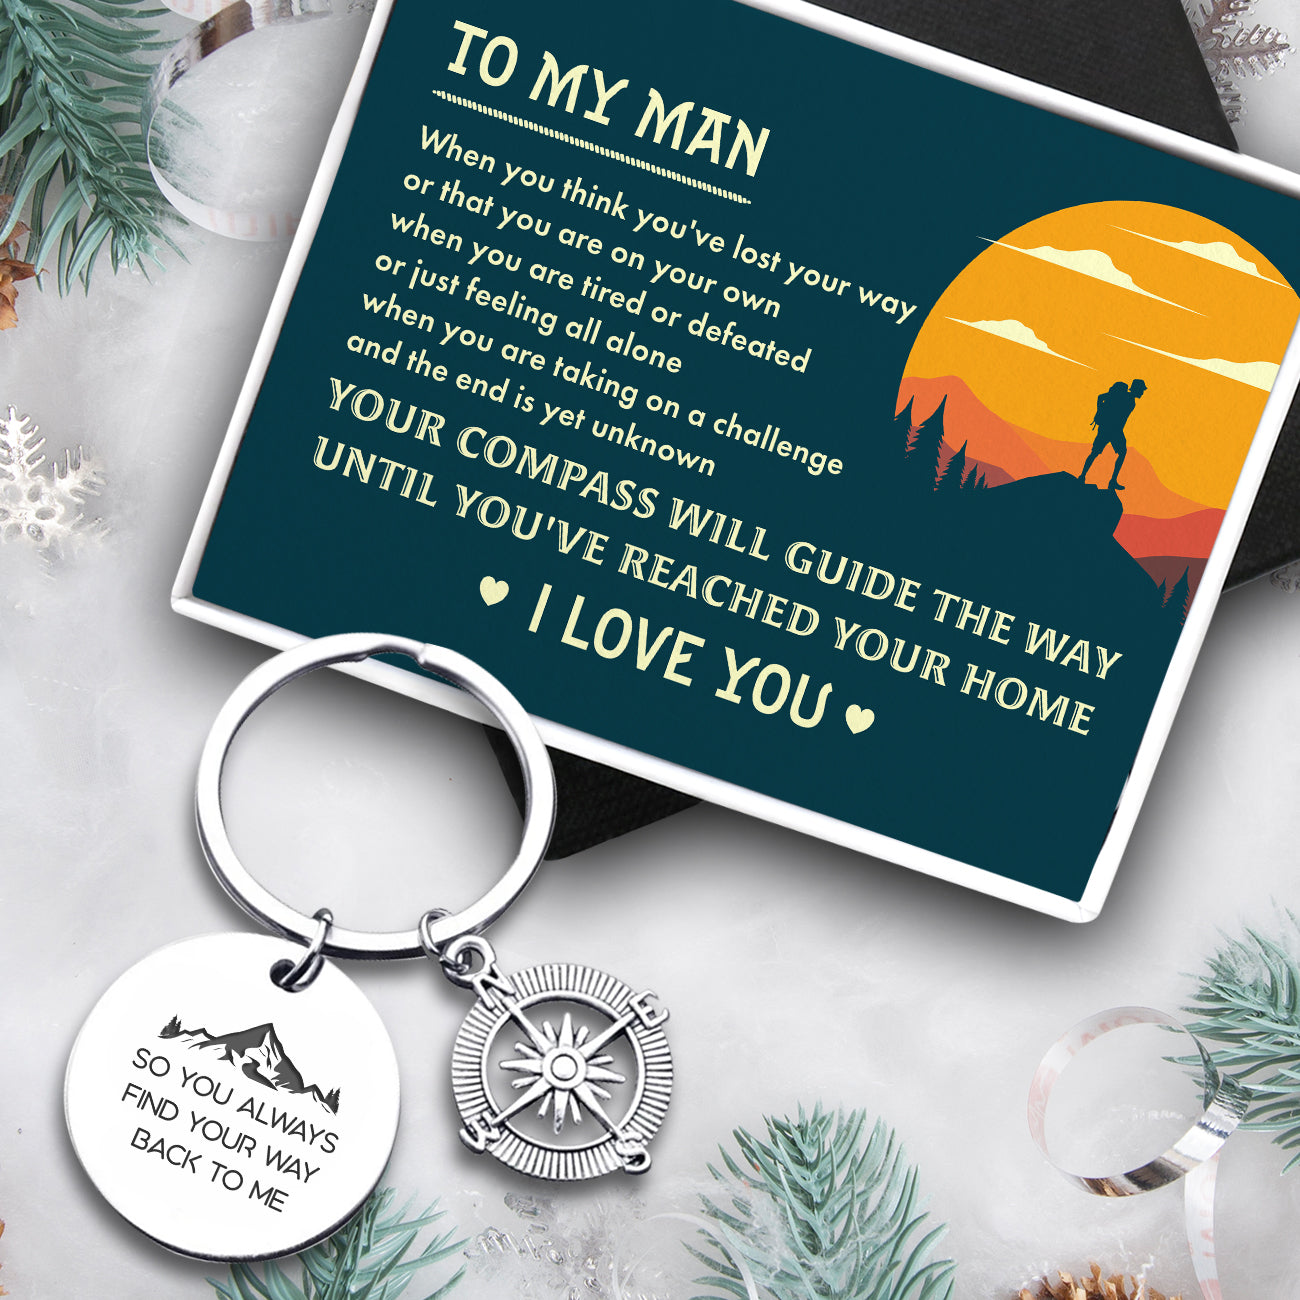 Compass Keychain - Travel - To My Man - So You Always Find Your Way Back To Me - Ukgkw26008